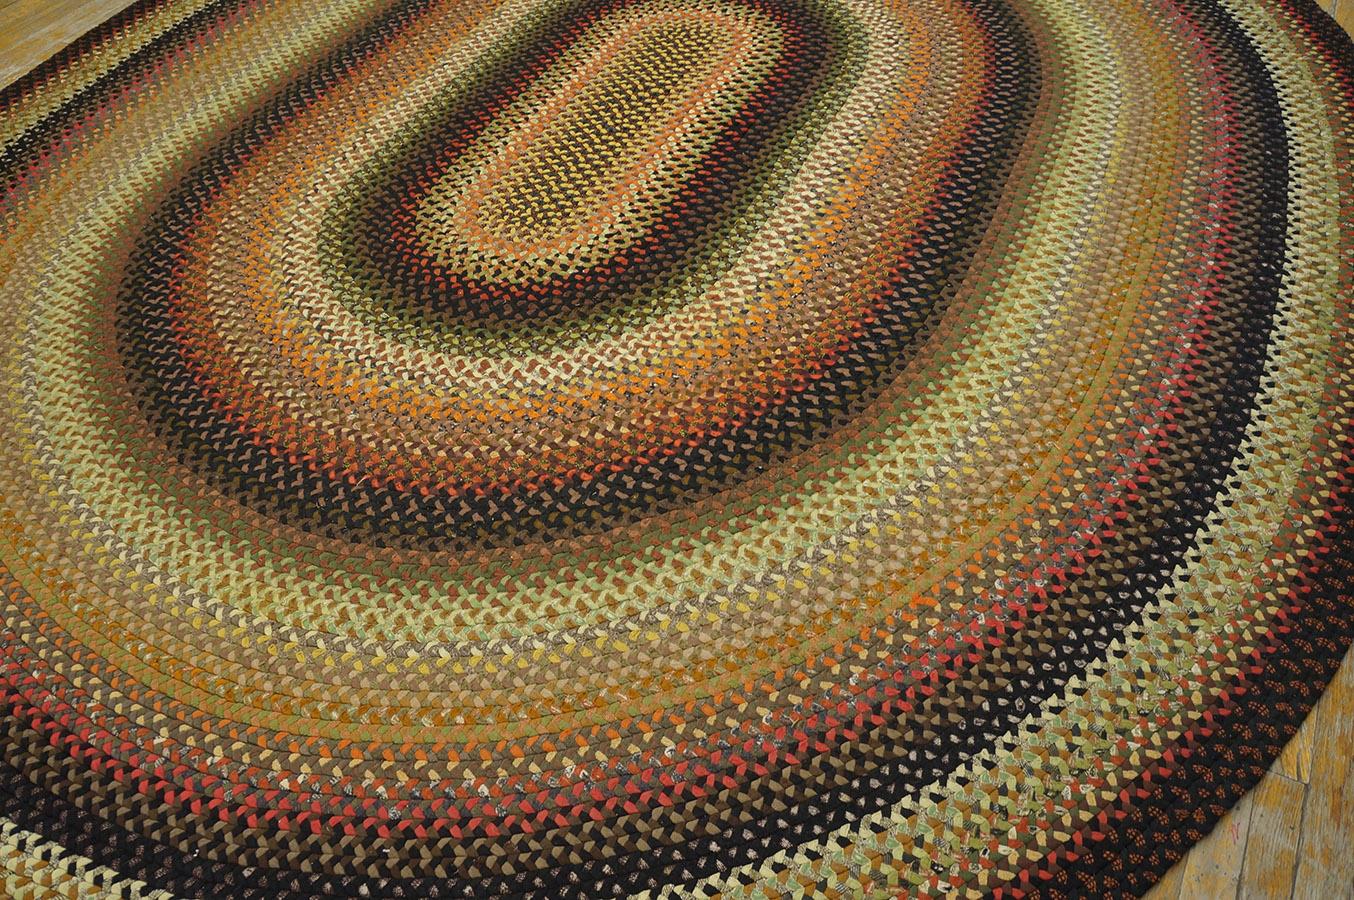 Country 1930s American Braided Rug ( 9'10